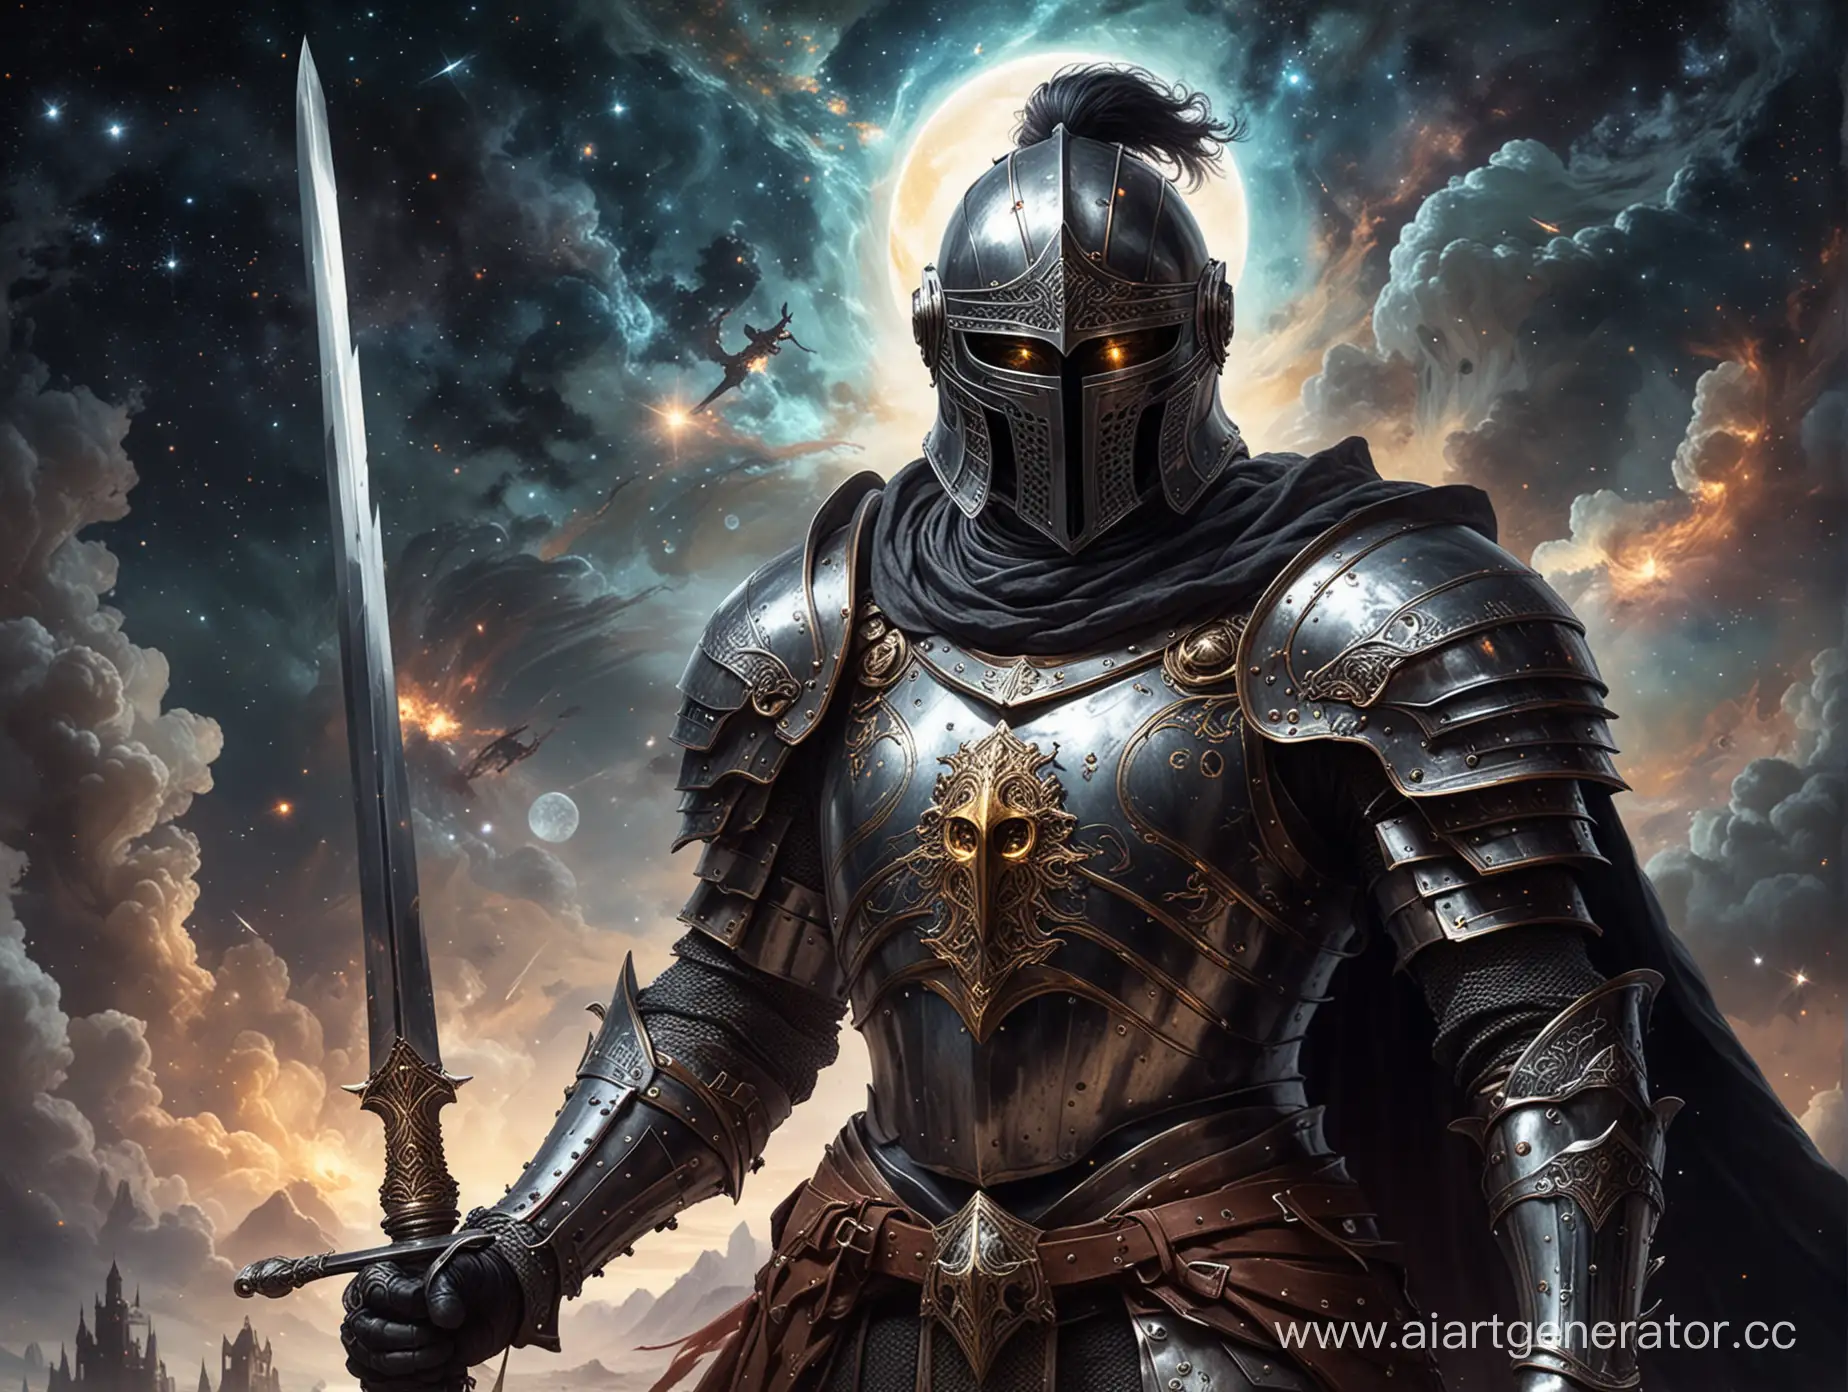 Knight-with-Cosmic-Vision-Holding-Sword